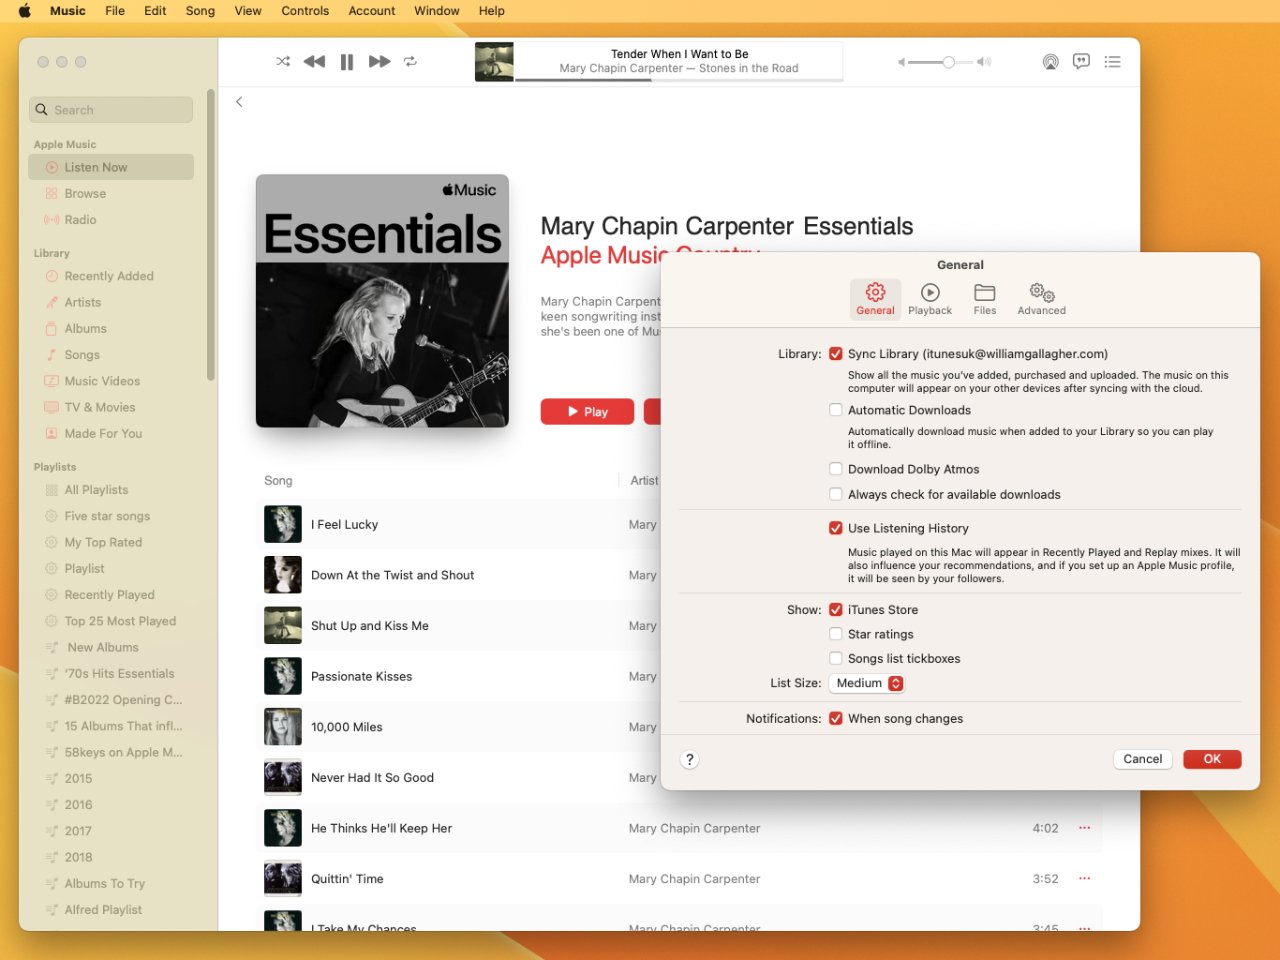 It's no longer even available by default, you have to choose to enable the iTunes Music Store